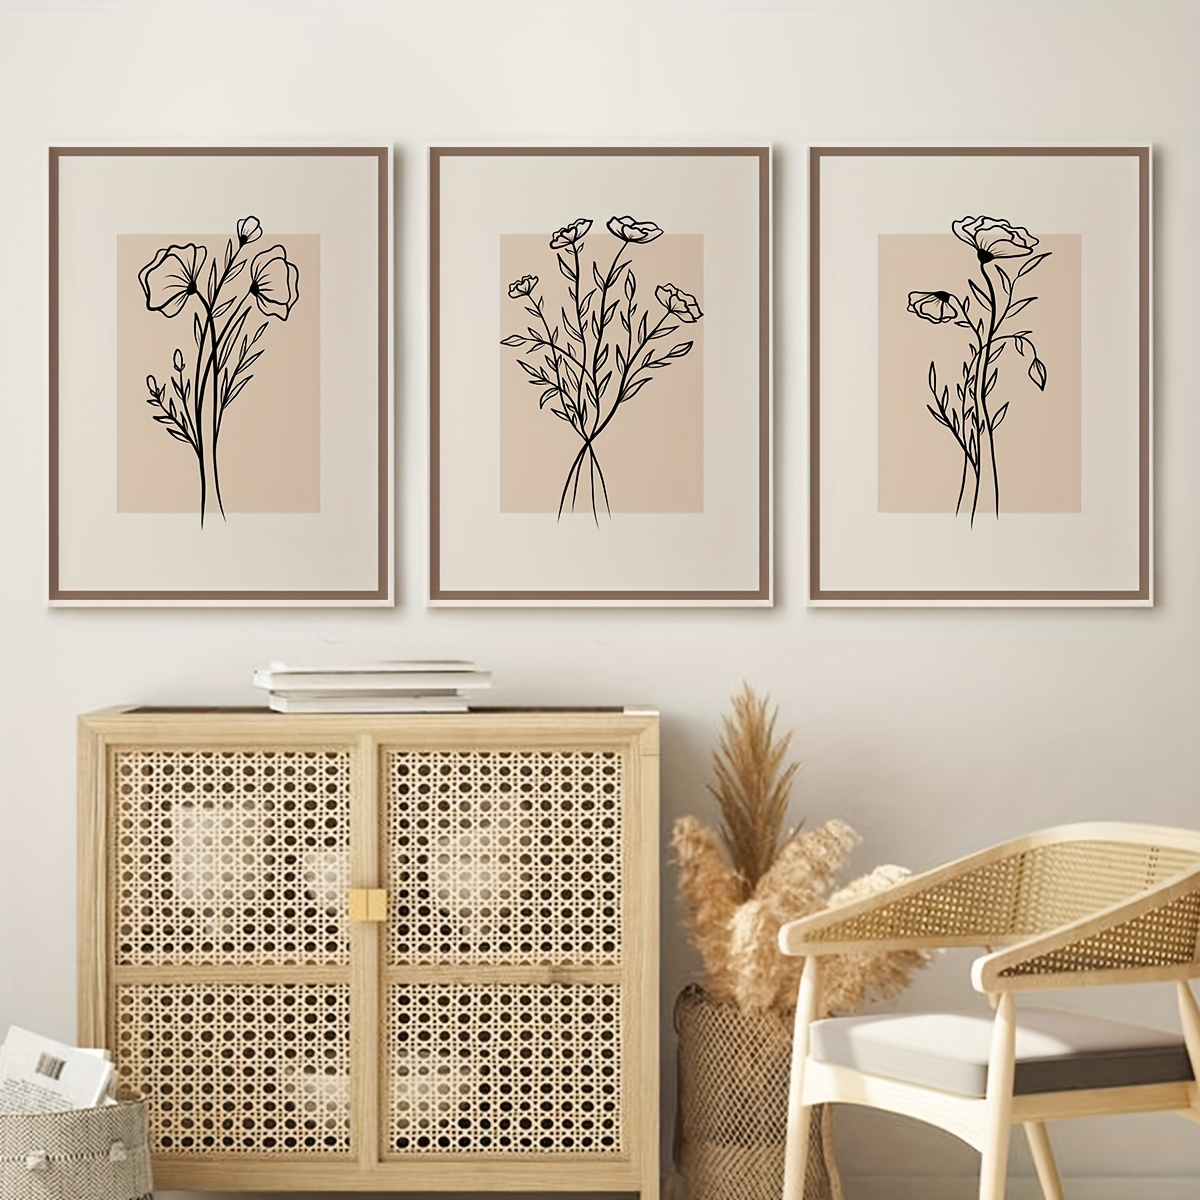 13 Unique Wall Art Ideas for Decorating Your Home